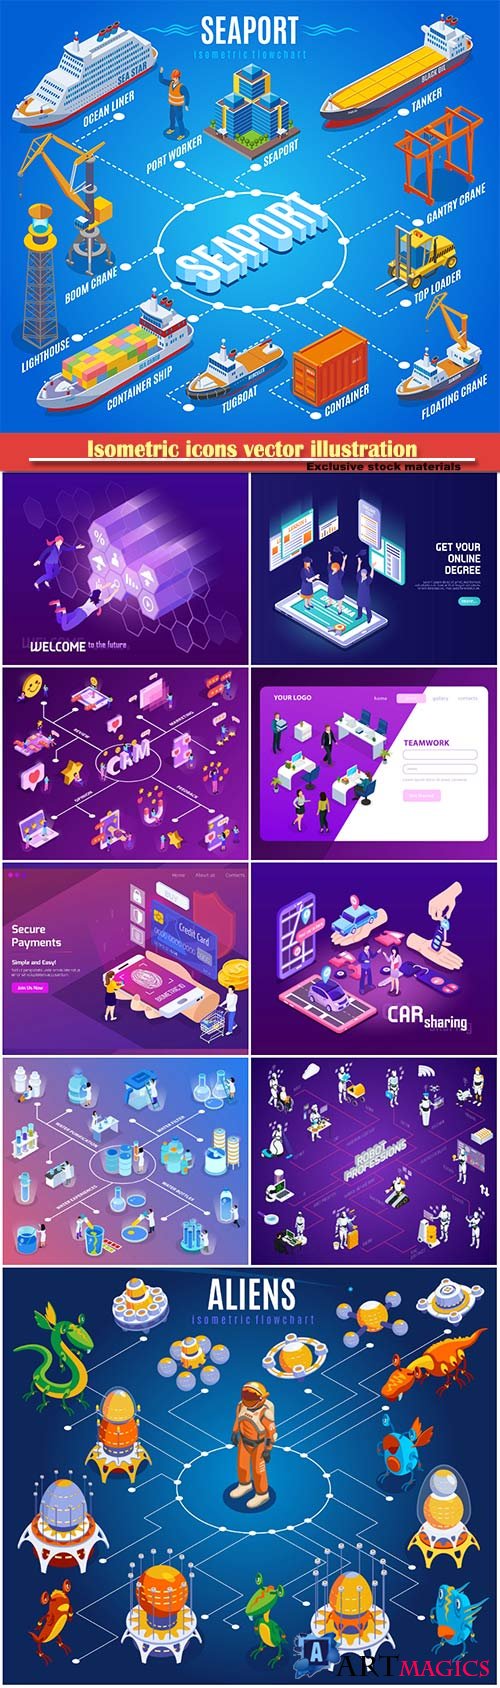 Isometric icons vector illustration, banner design template # 24